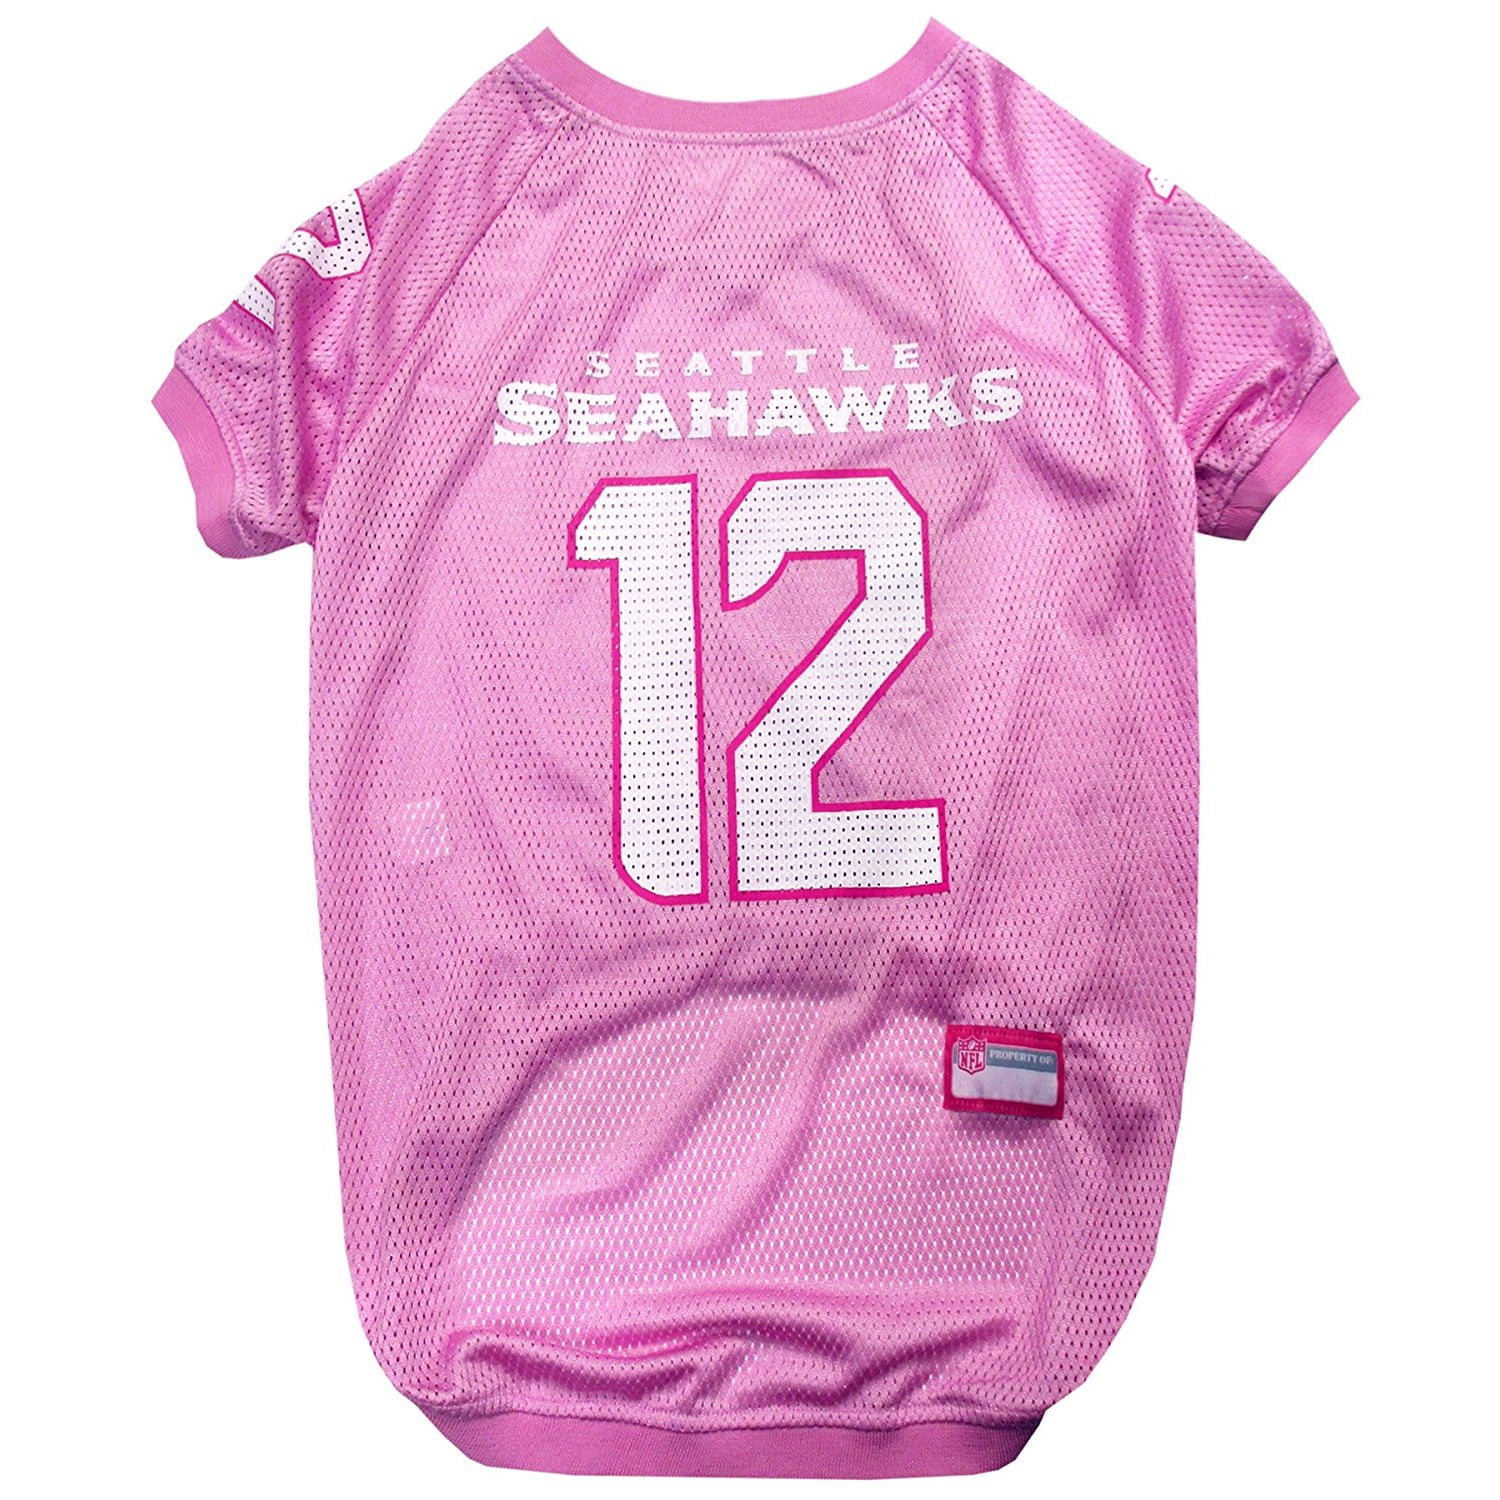 Pets First NFL Seattle Seahawks #12 Pink Jersey for DOGS & CATS, Licensed Football  Jerseys - Extra Small 